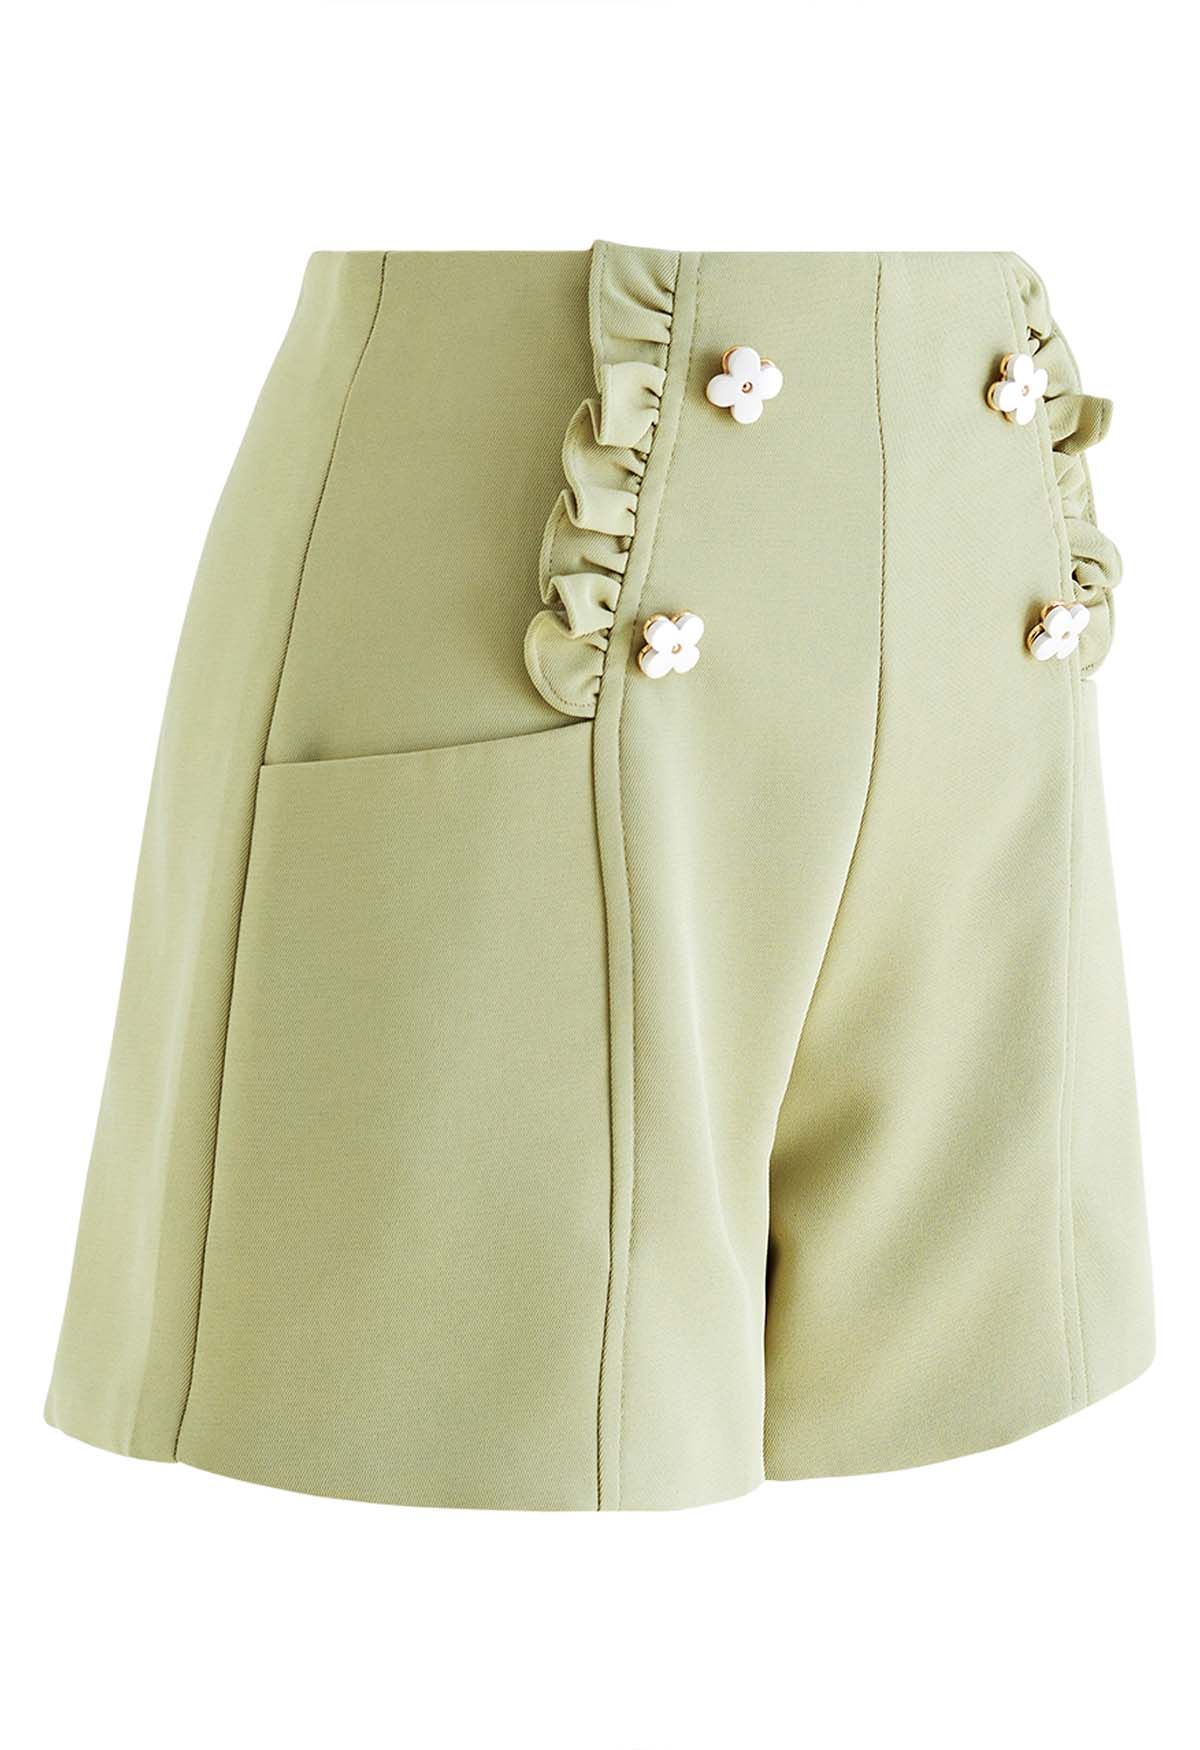 Adorable Flower Ruffle Trim Shorts in Pea Green